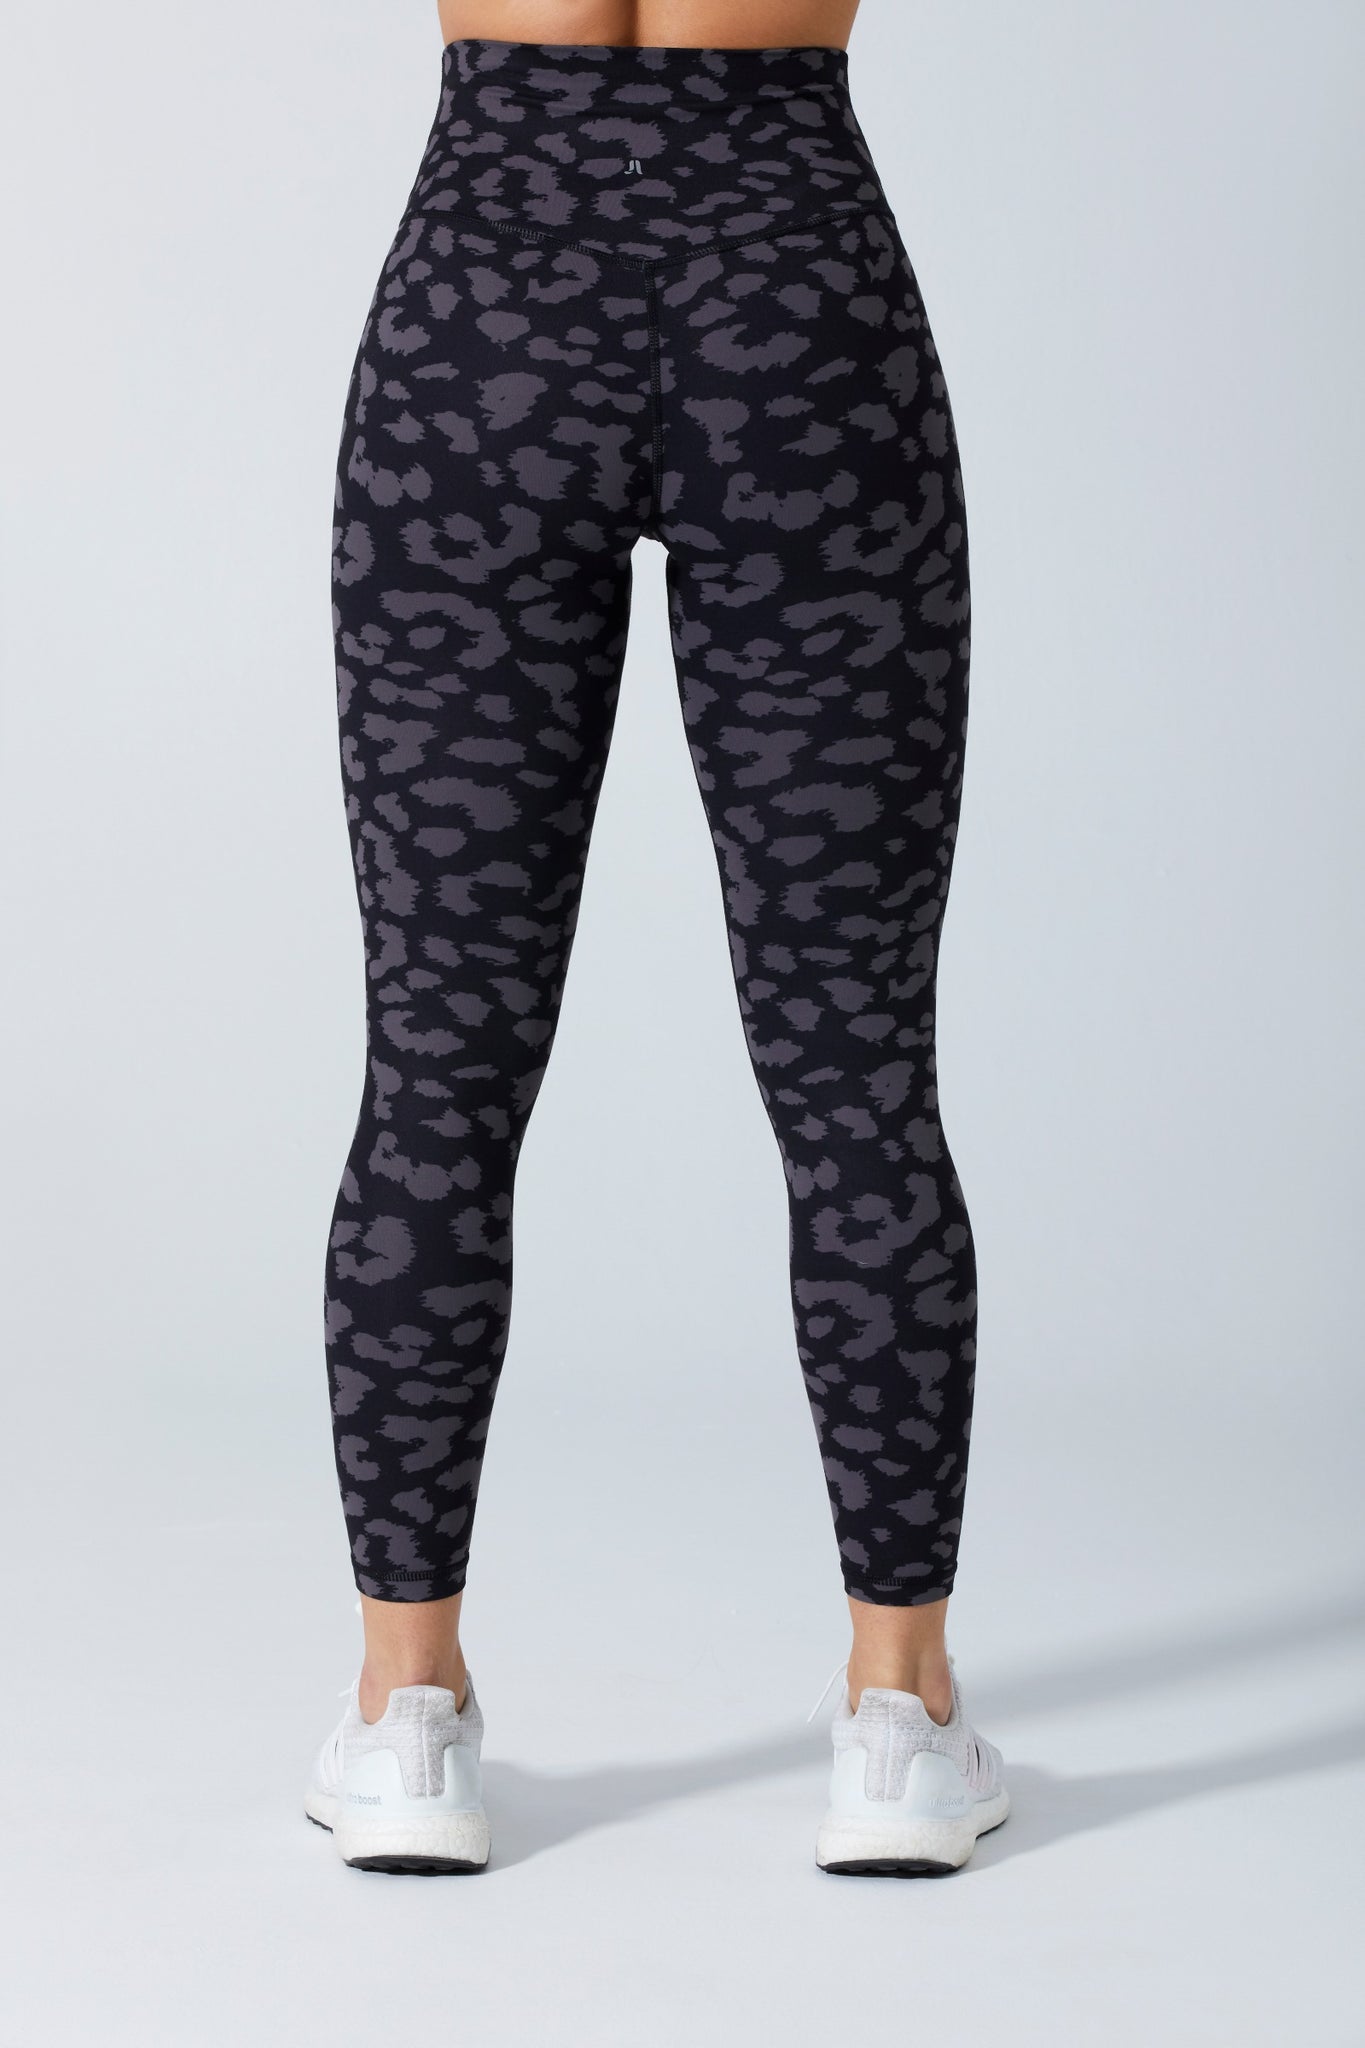 The Best Animal-Print Workout Leggings and Gear For Women | POPSUGAR Fitness